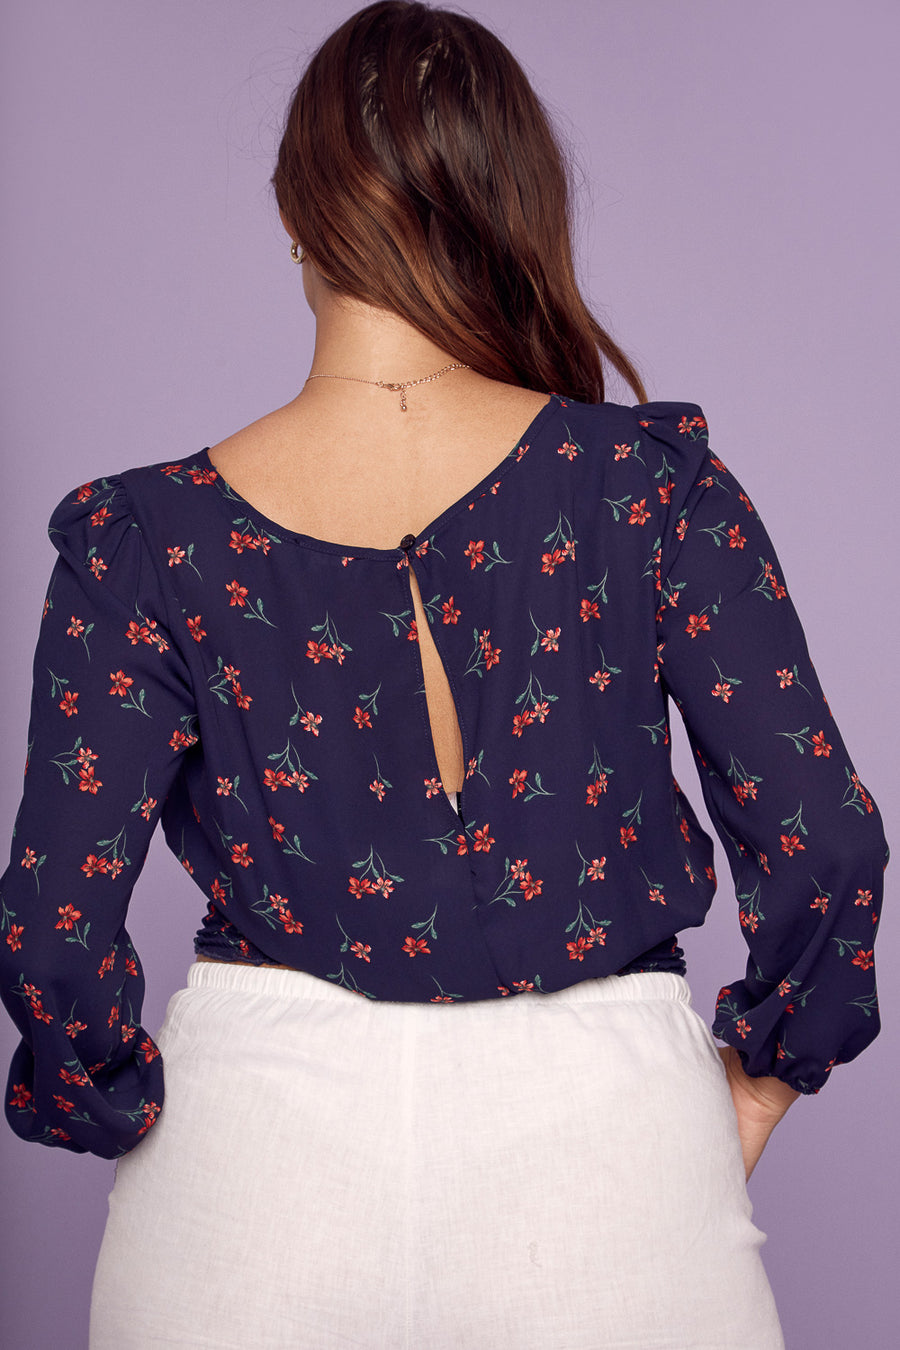 Long Sleeve Navy Floral Blouse